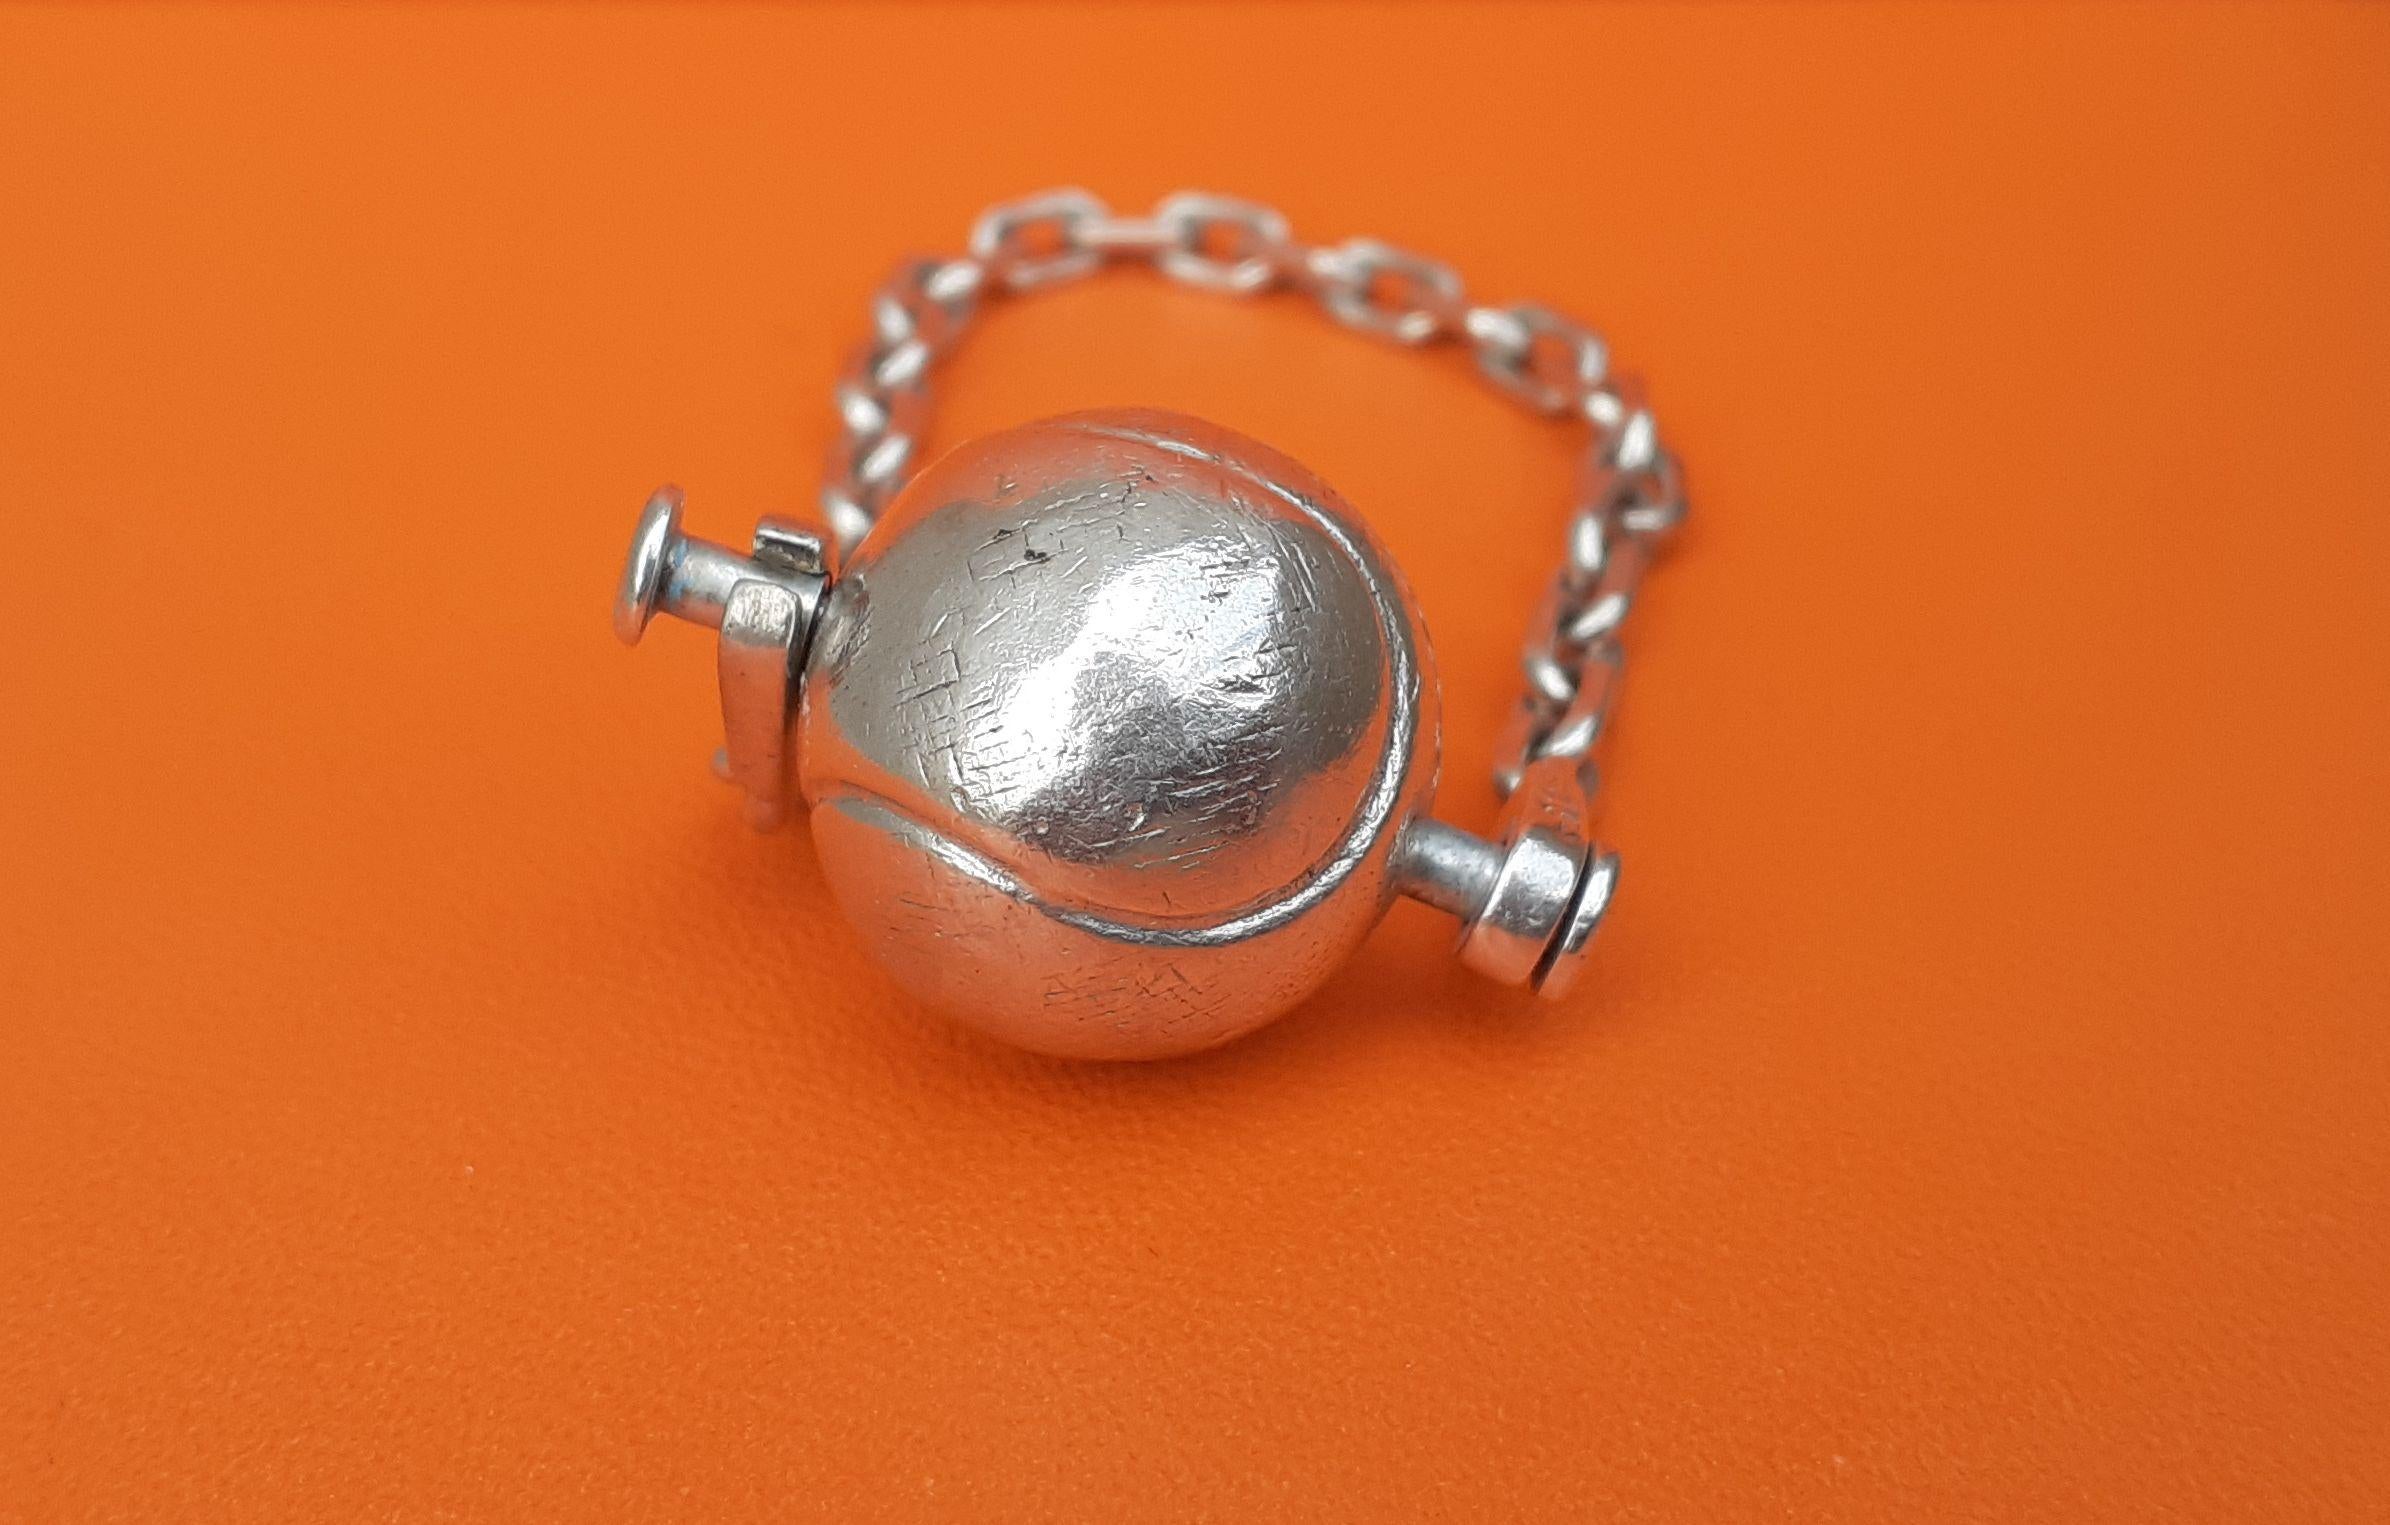 Exceptional Hermès Vintage Tennis Ball Key Ring Keychain in Silver Rare For Sale 1